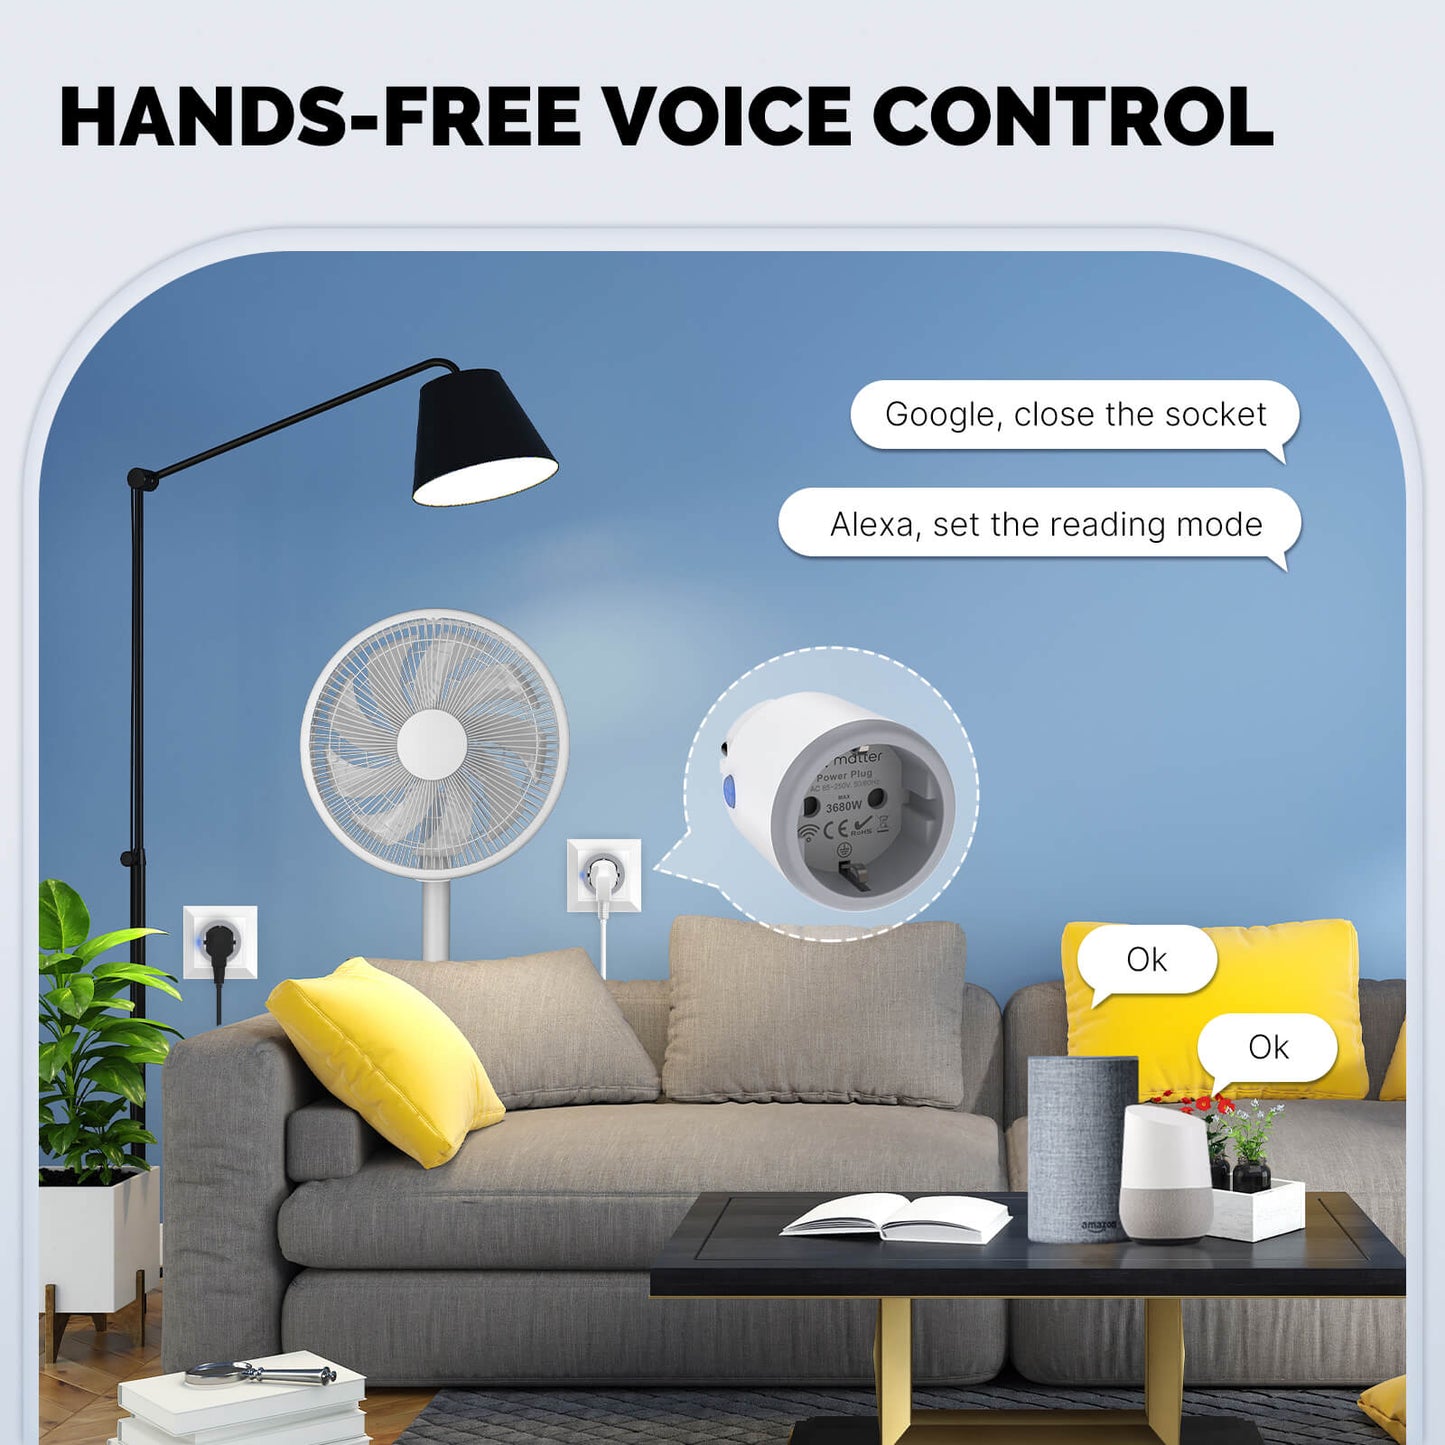 hands-free voice control - MOES